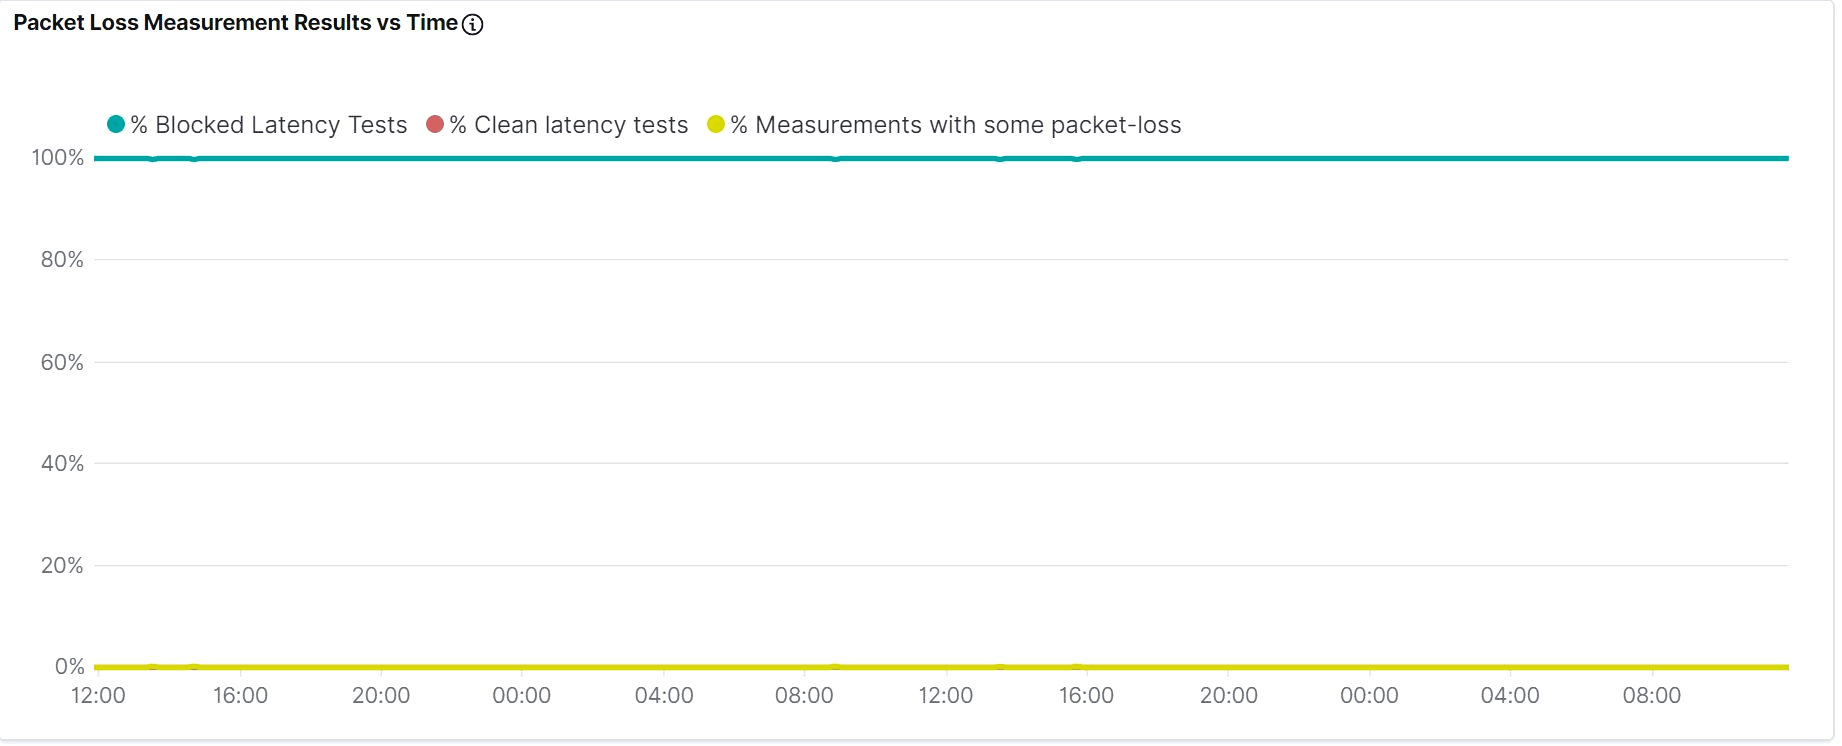 Packet Loss Measurement Results vs Time